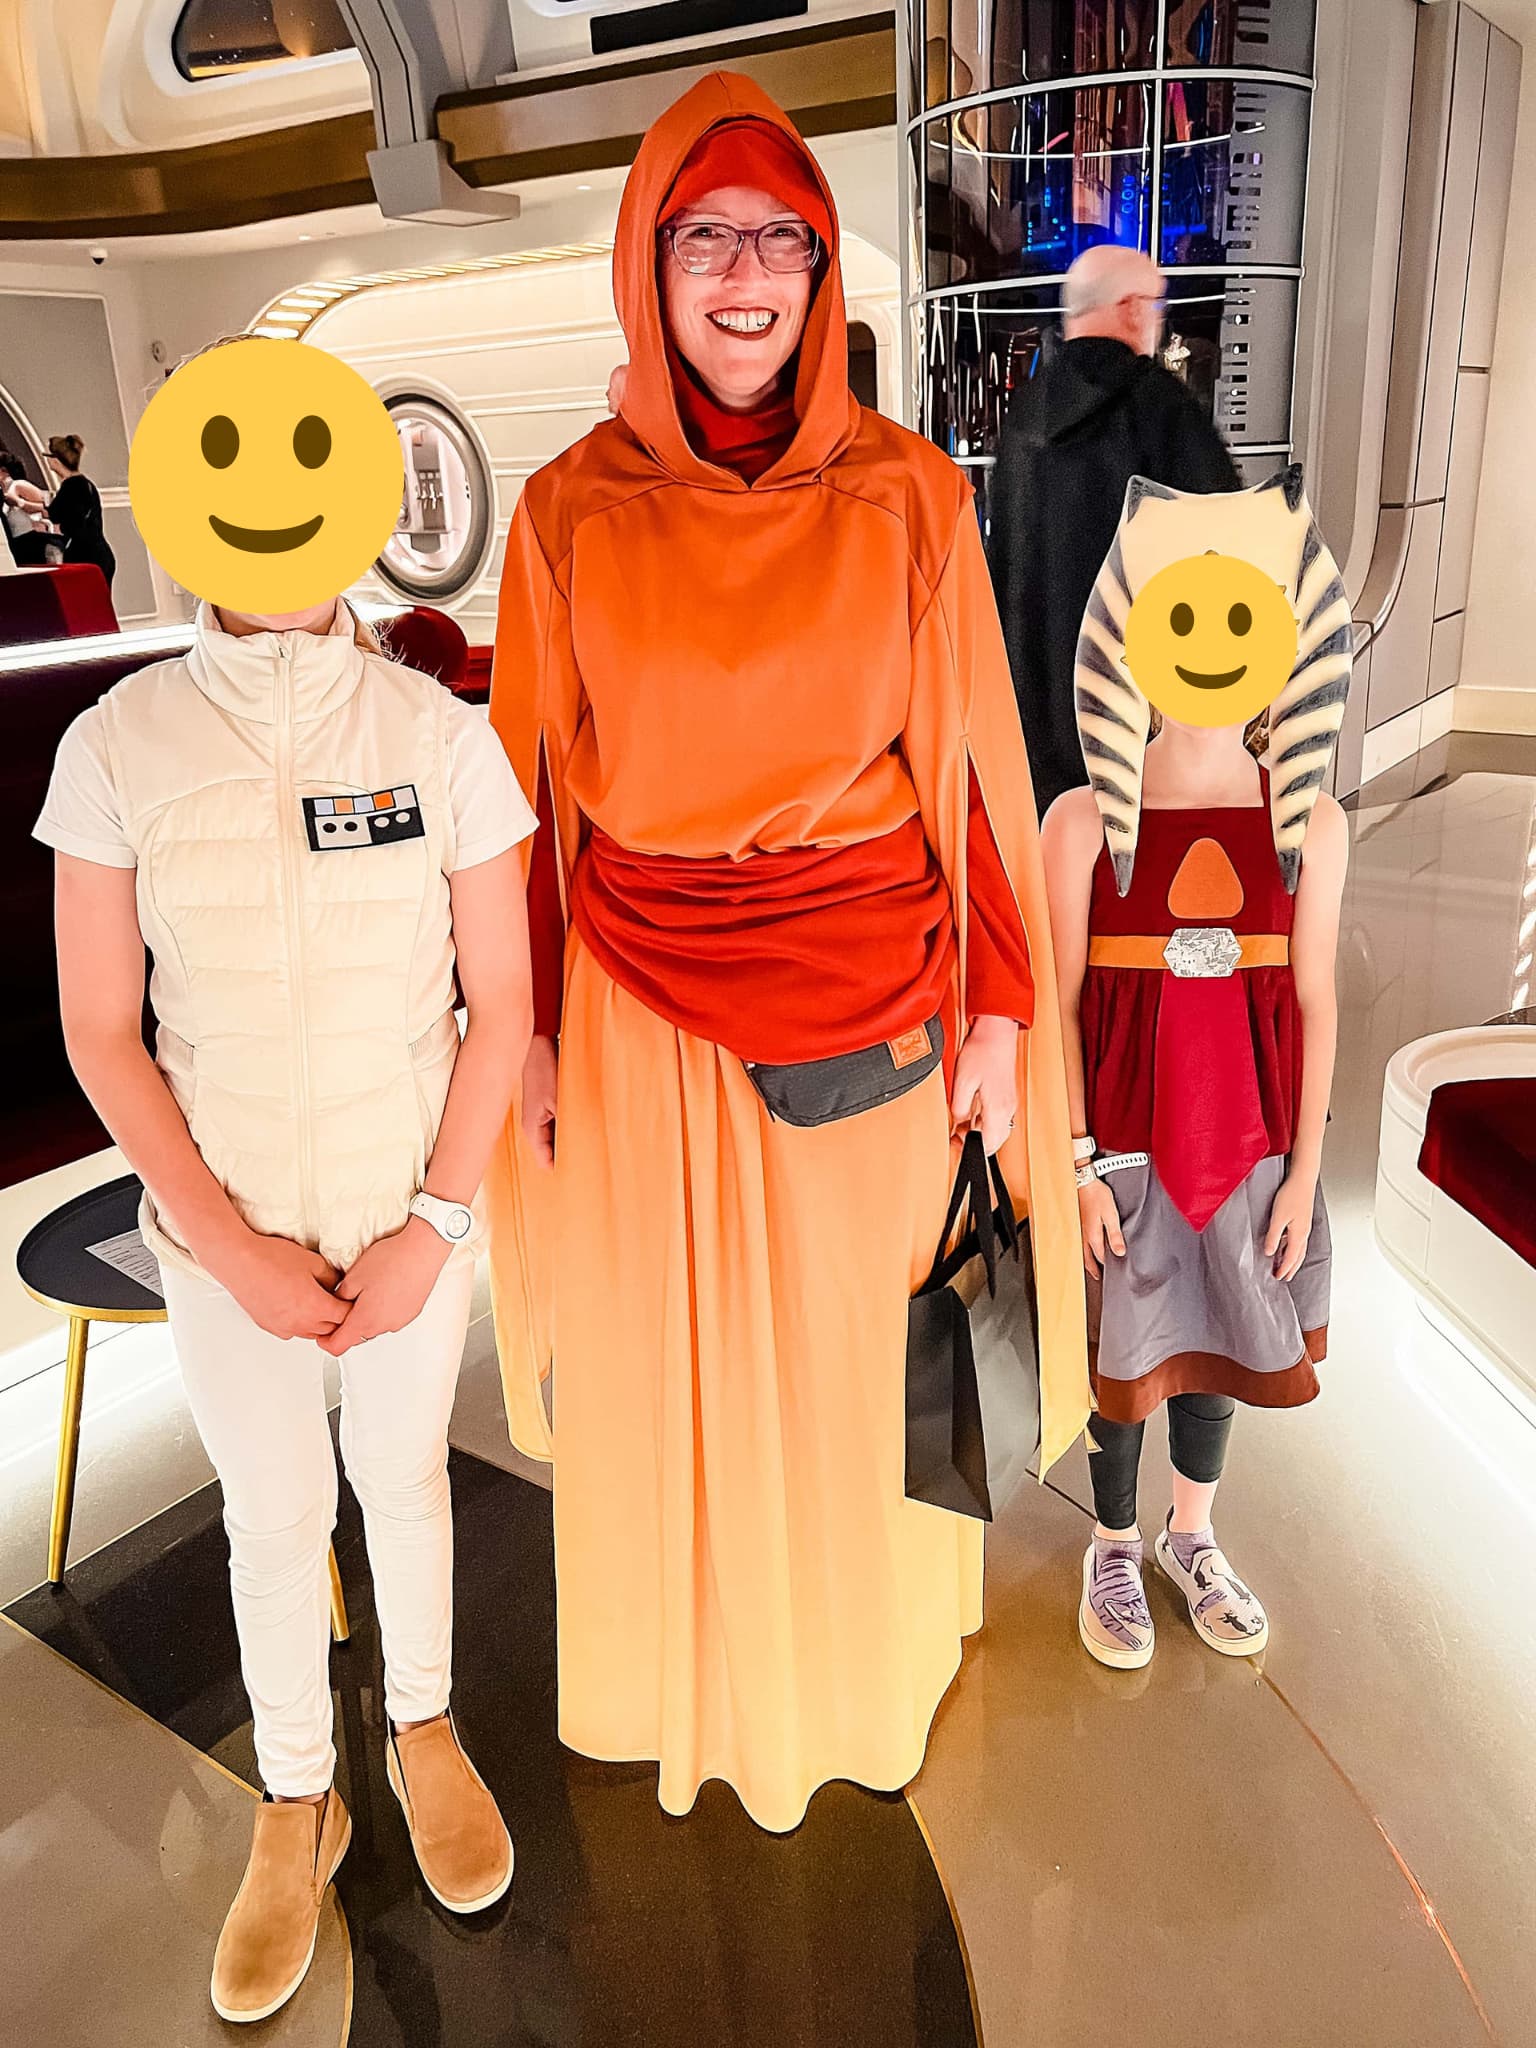 Guests are encouraged to wear costumes on the Galactic Starcruiser